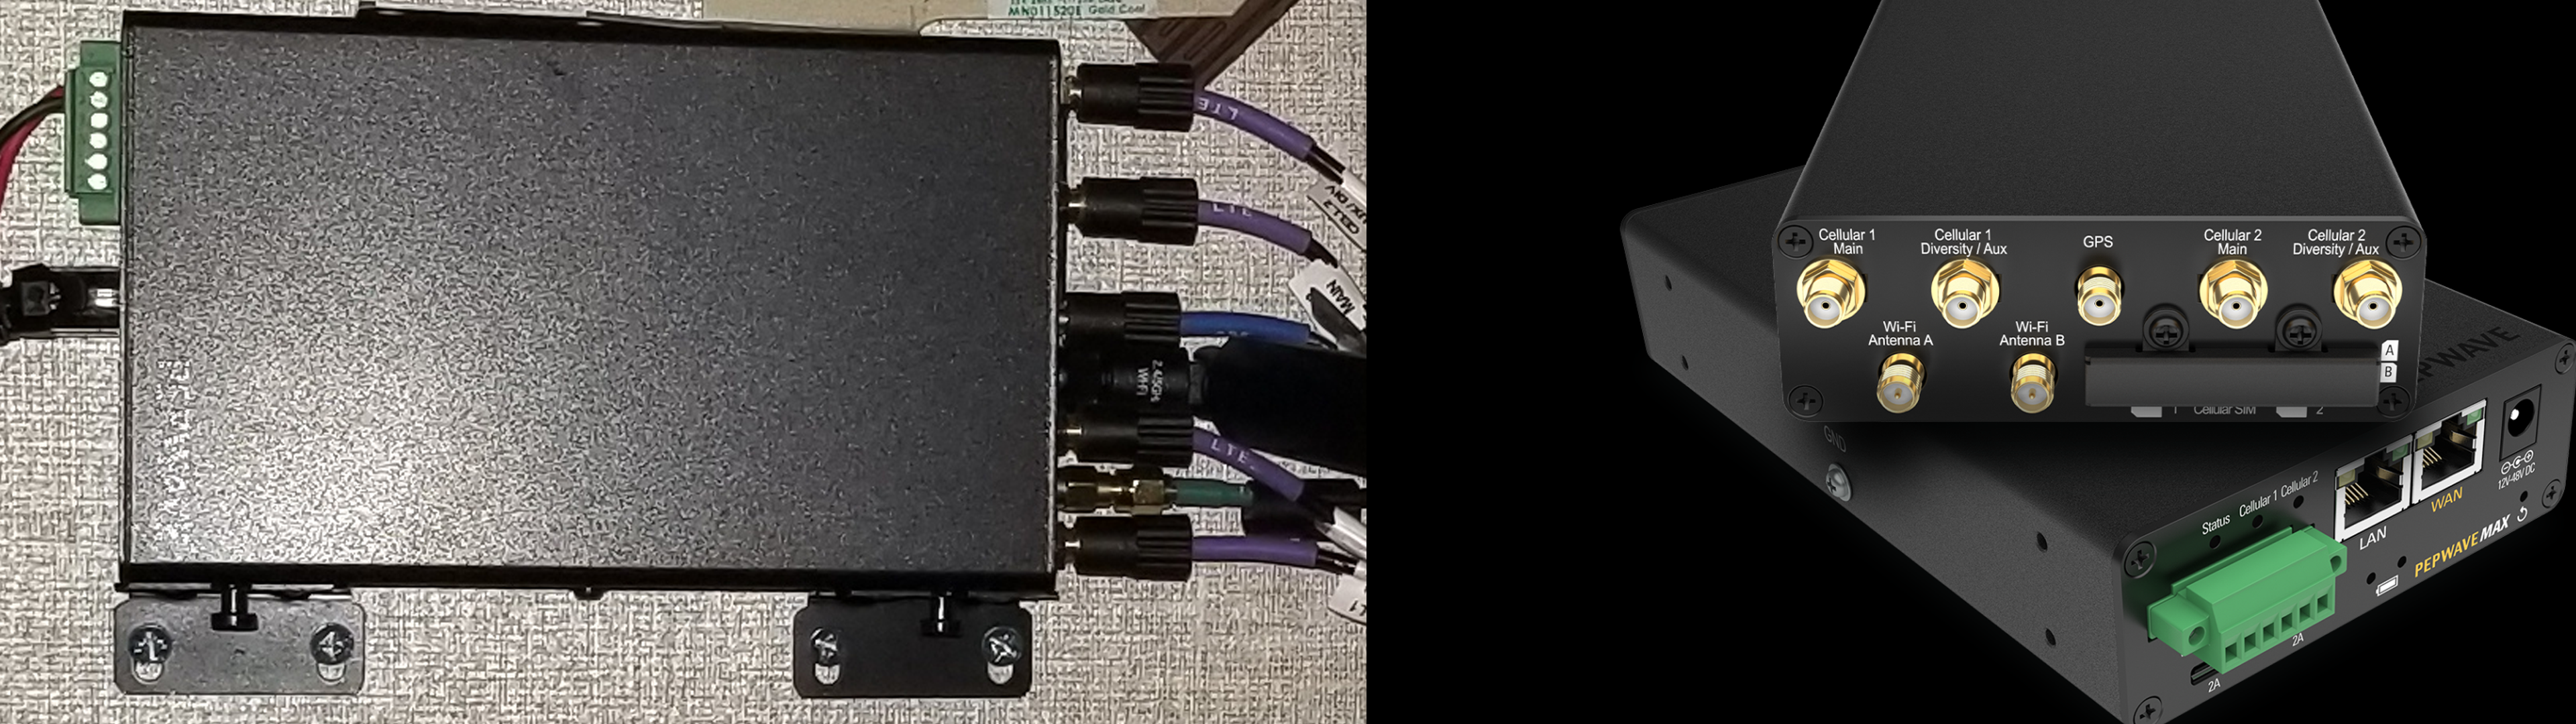 A more expensive network device, but with more connectivity options. (Peplink Max Transit Duo) Image: Lucinda Belden and Peplink.